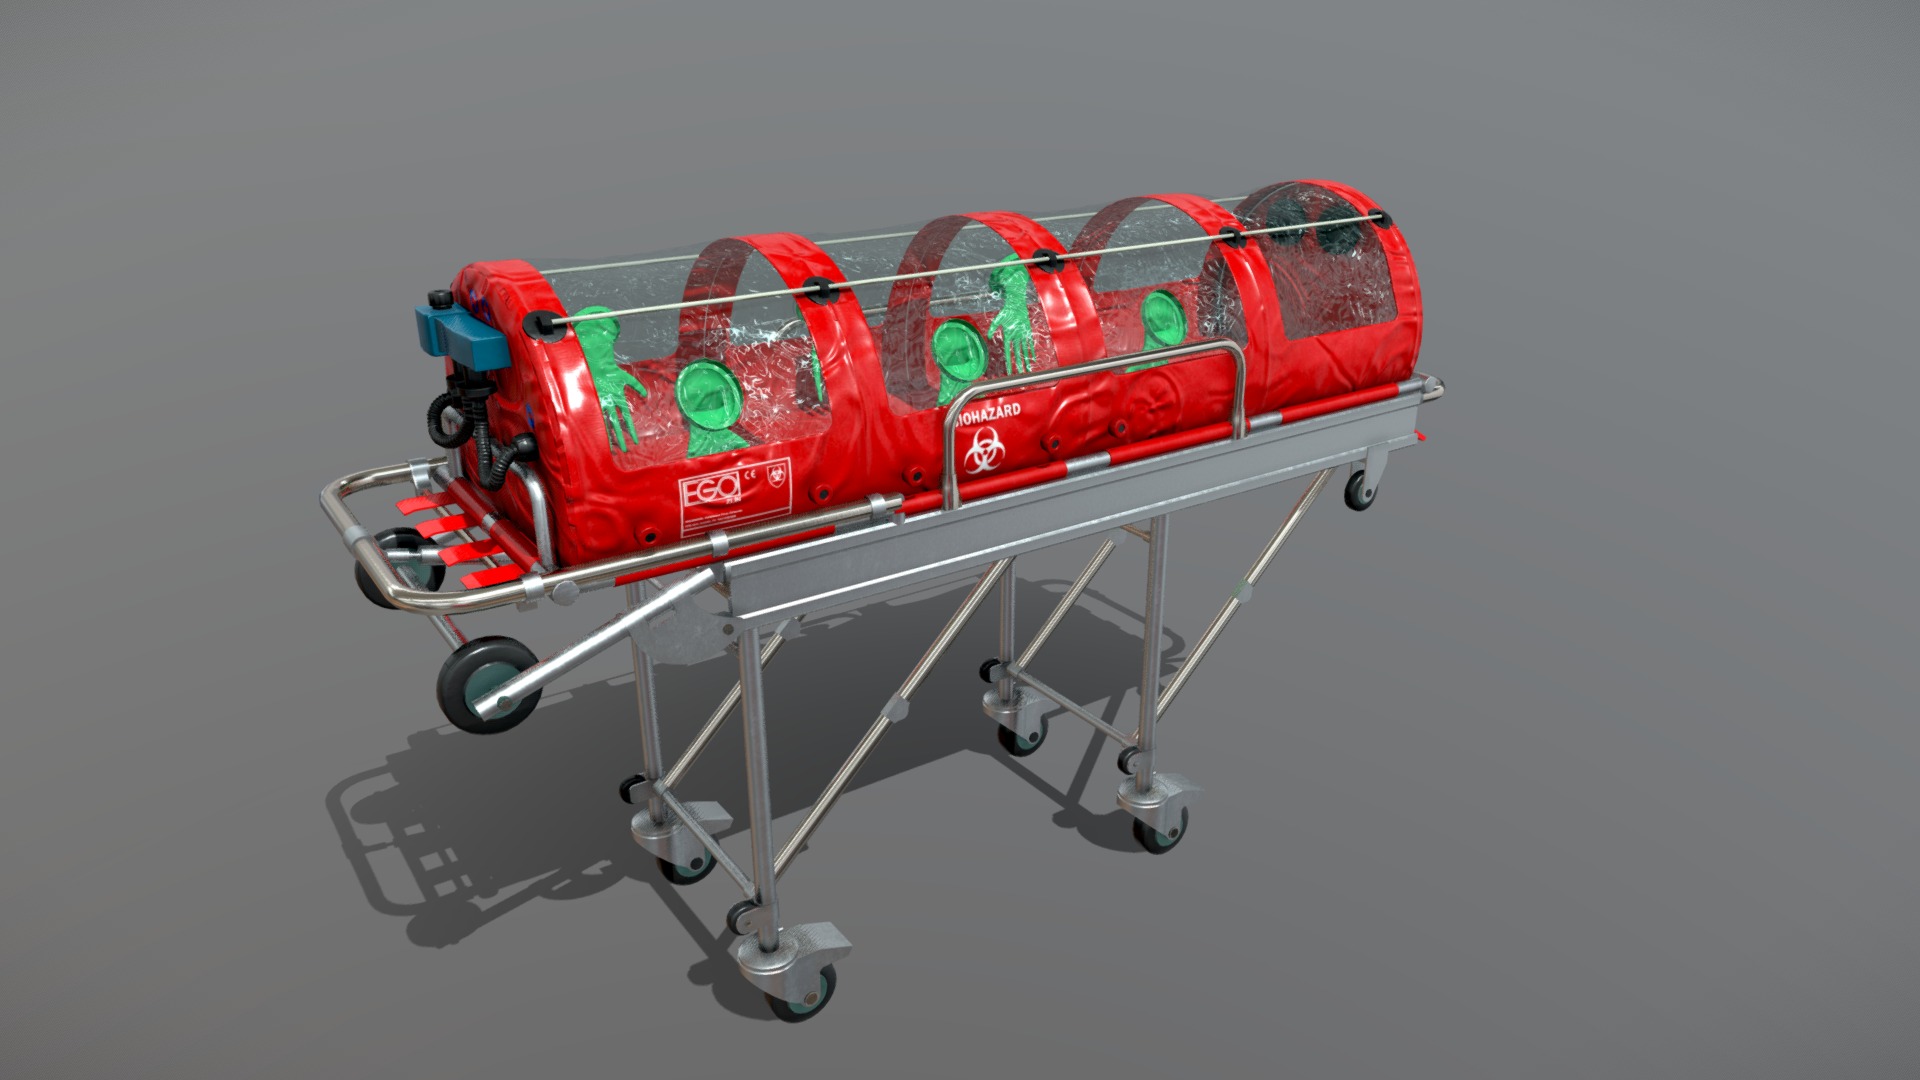 3D model Biological isolation chamber BIO-BAG EBV- 30/ 40 - This is a 3D model of the Biological isolation chamber BIO-BAG EBV- 30/ 40. The 3D model is about a shopping cart with a red and blue shopping cart.